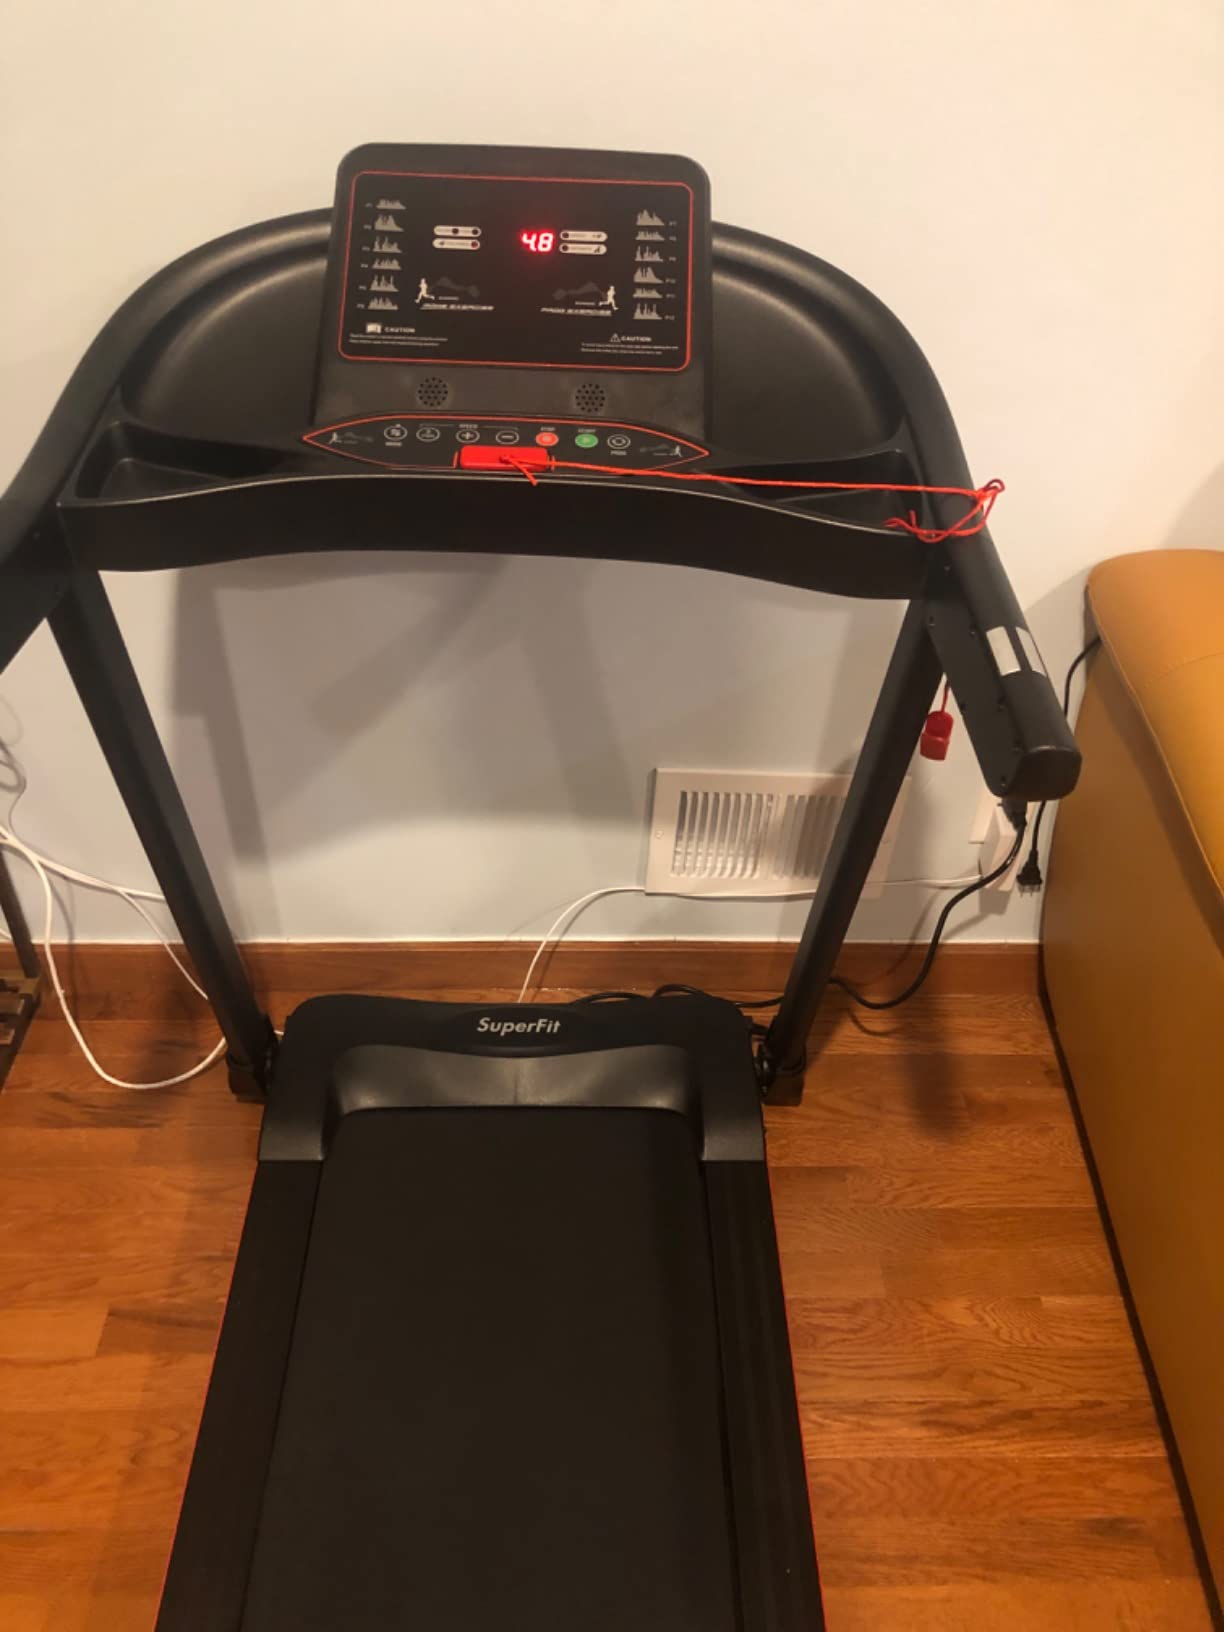 The price is acceptable, so is the treadmill.